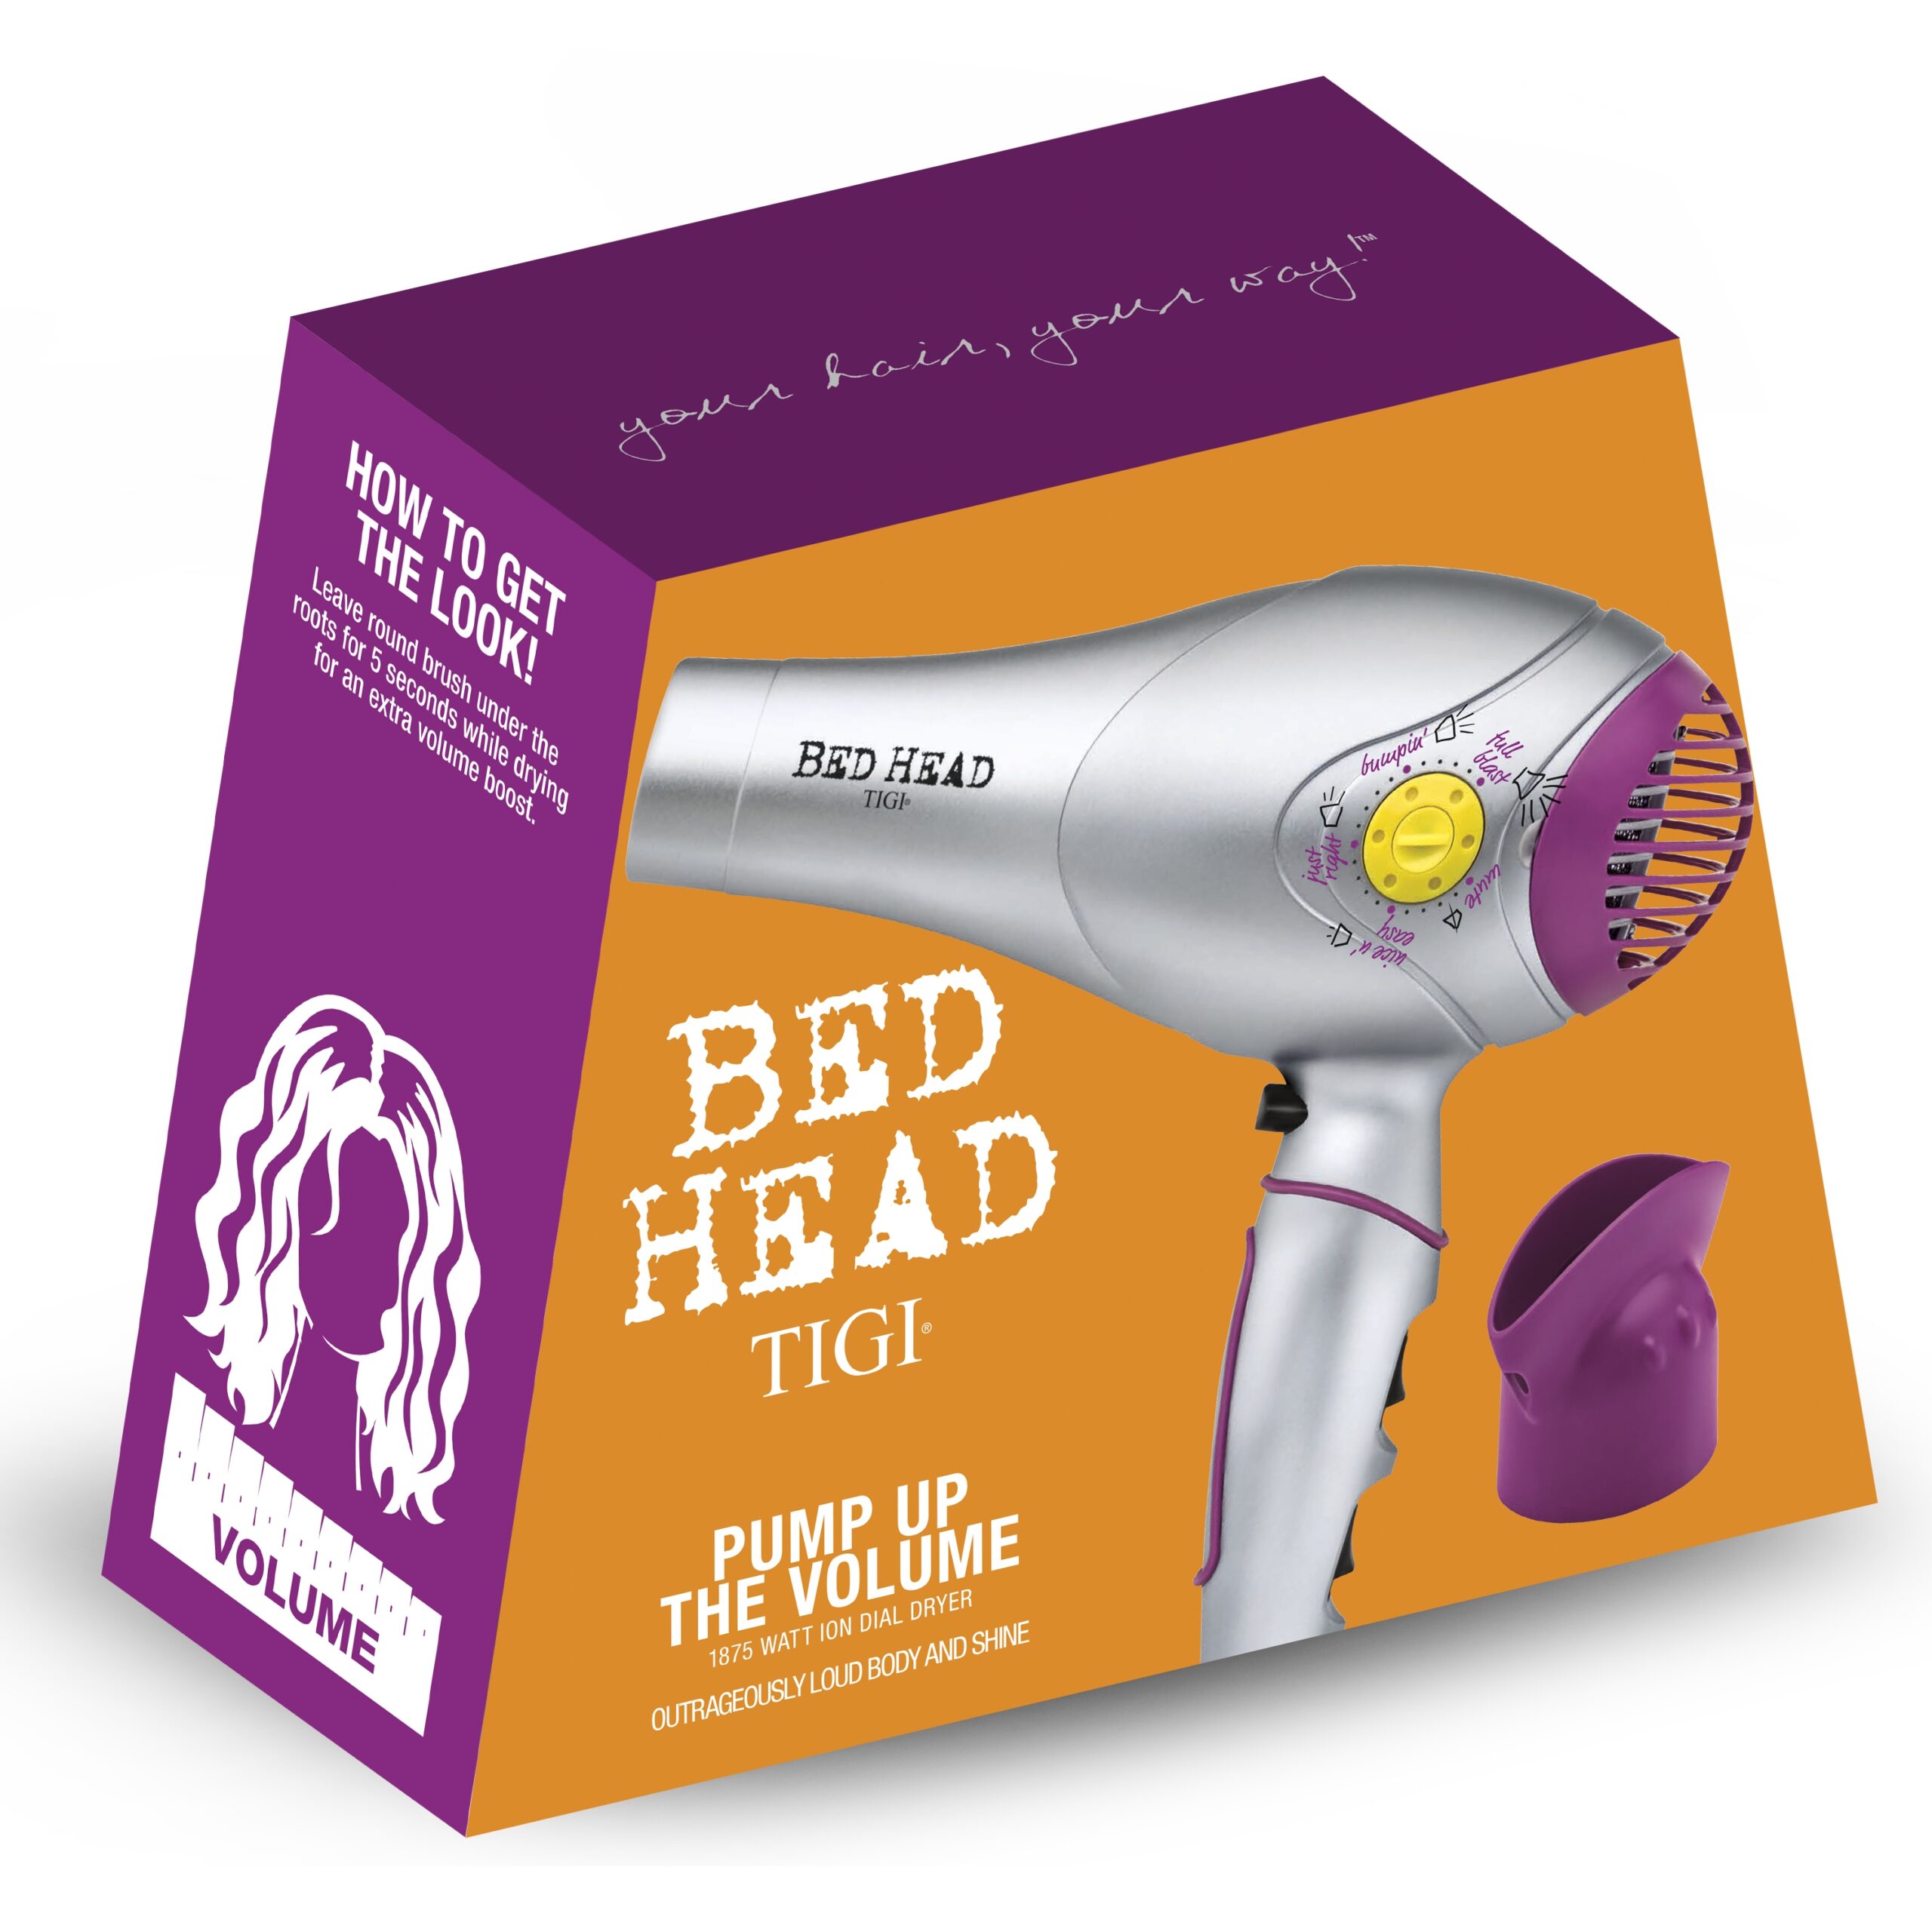 Bed Head Pump Up The Volume 1875 Watt Ion Dial Dryer - Bedhead Styling